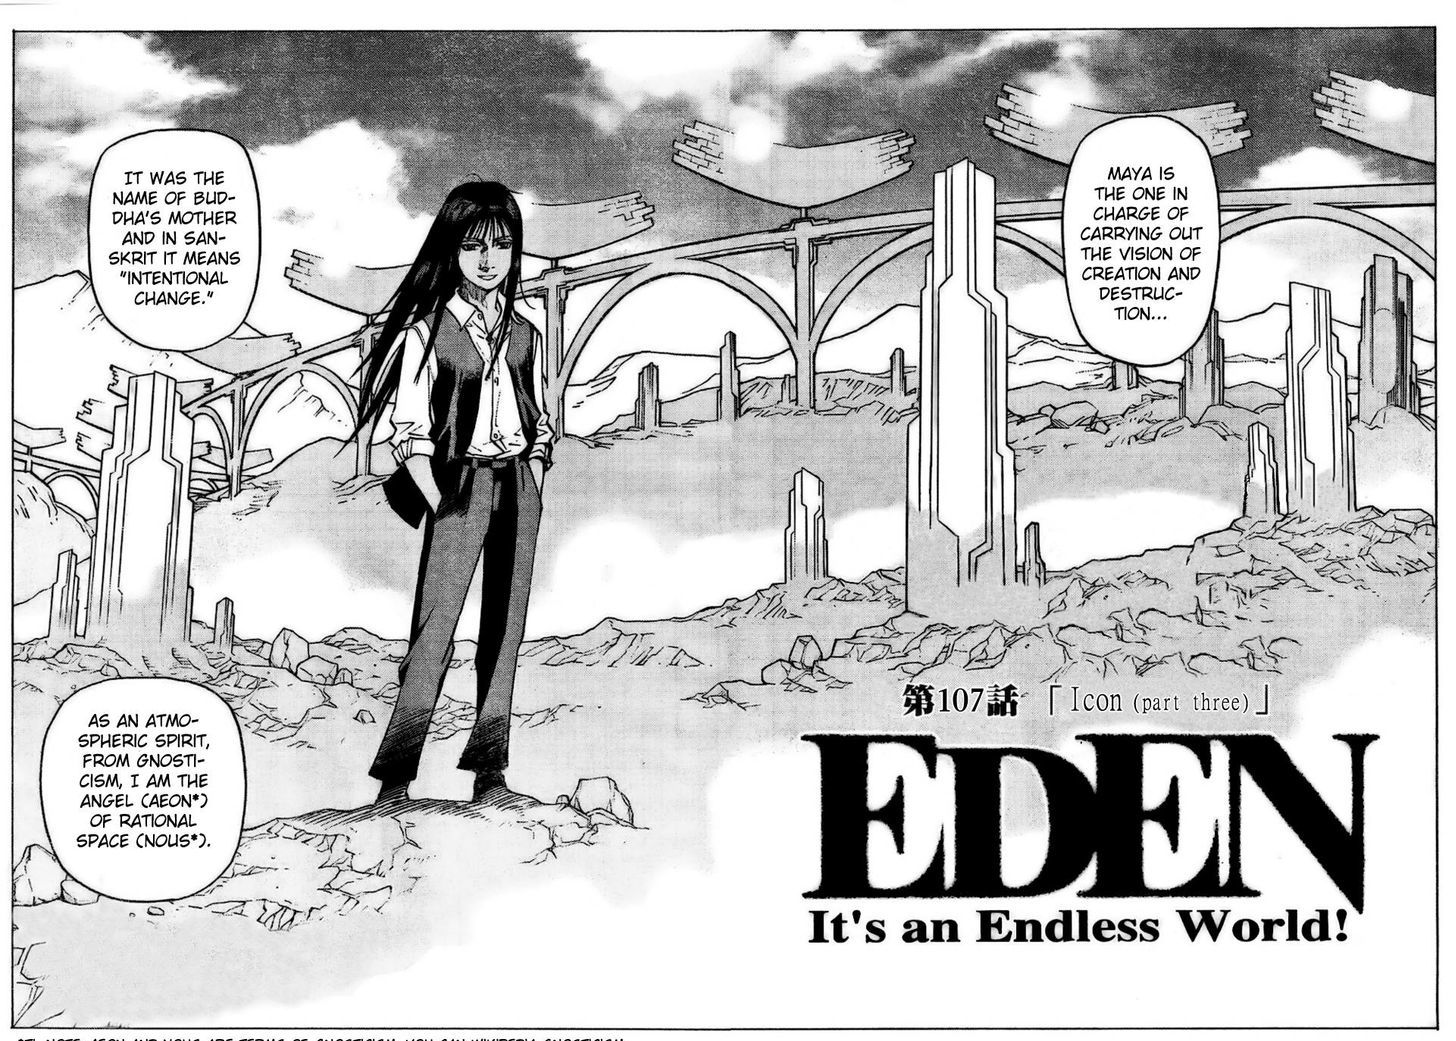 Eden - It's An Endless World! - Page 2